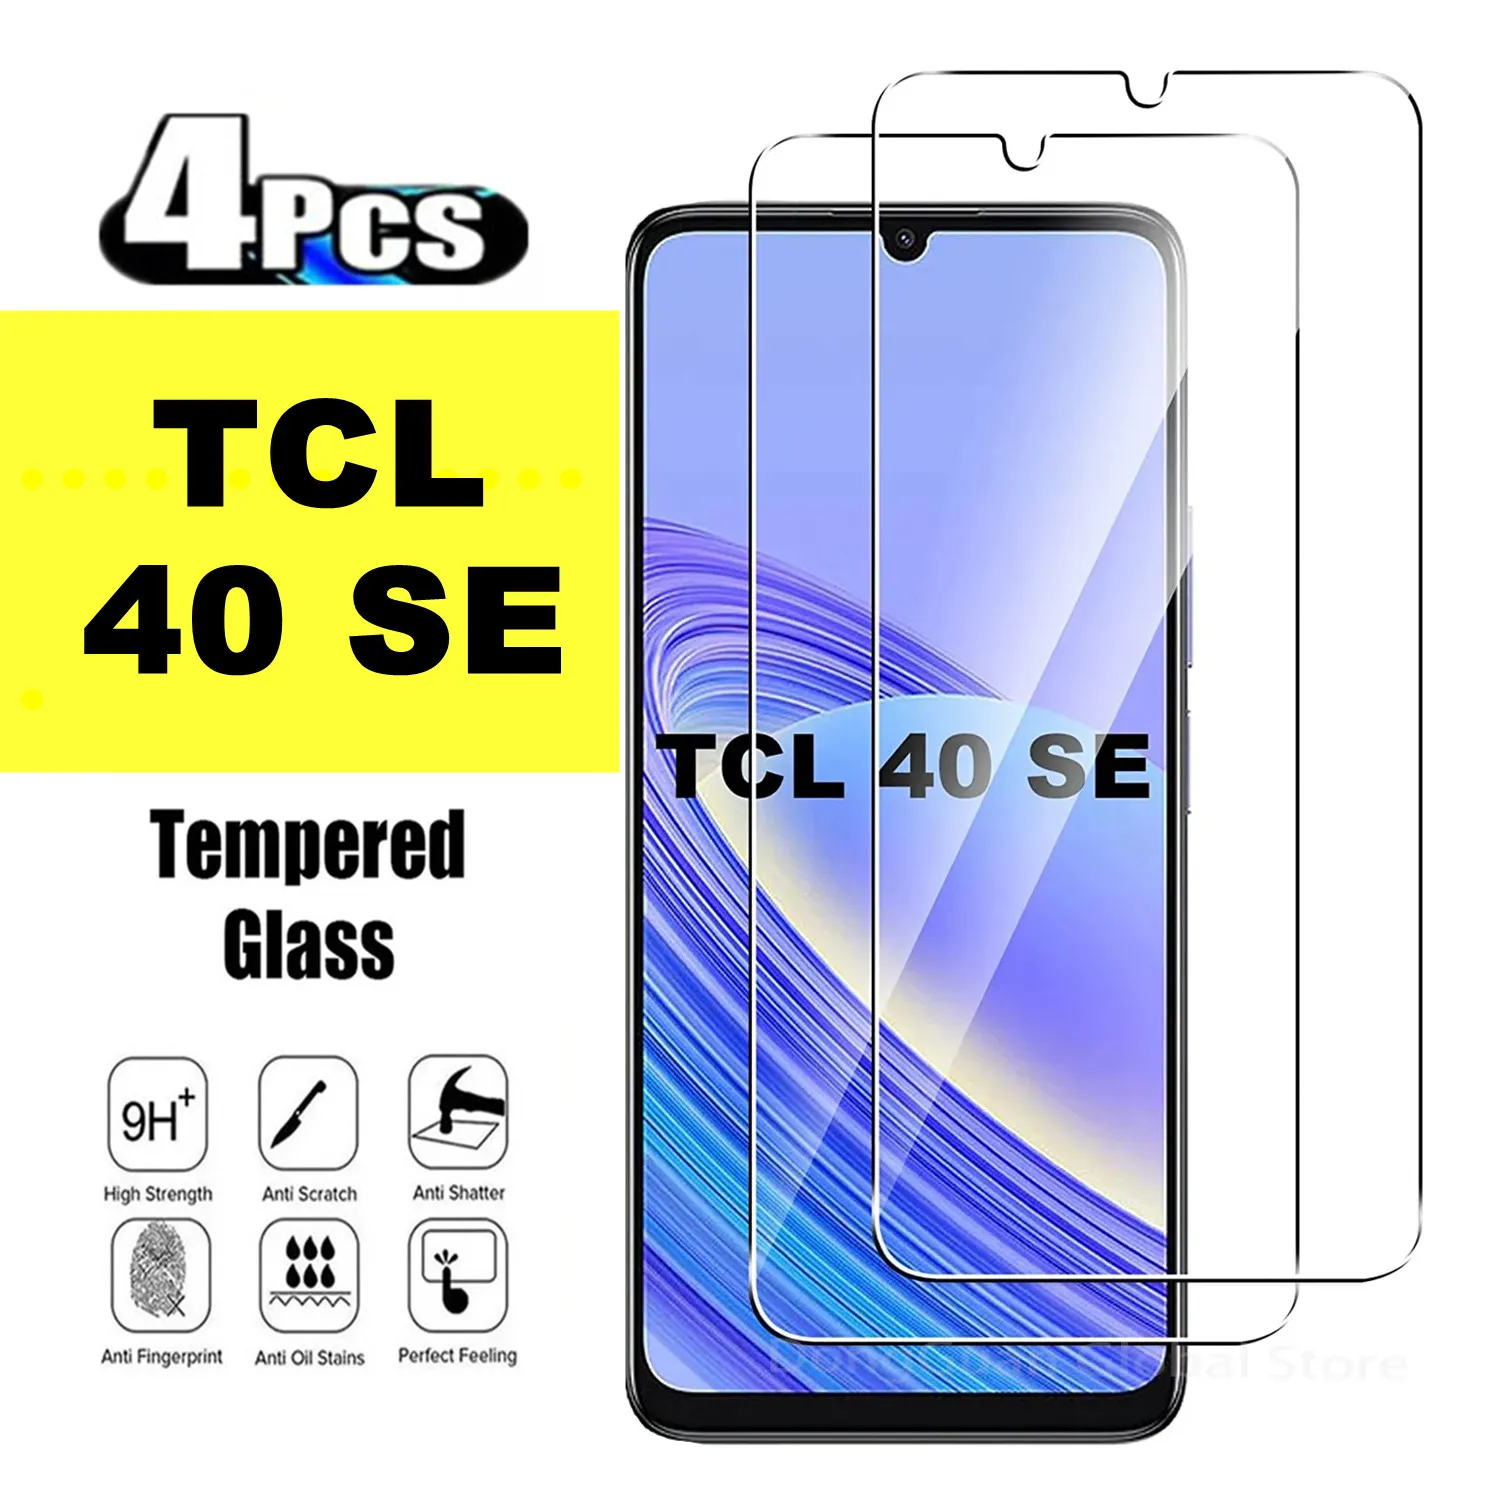 Accessories for TCL 40 SE - Cool Accesorios